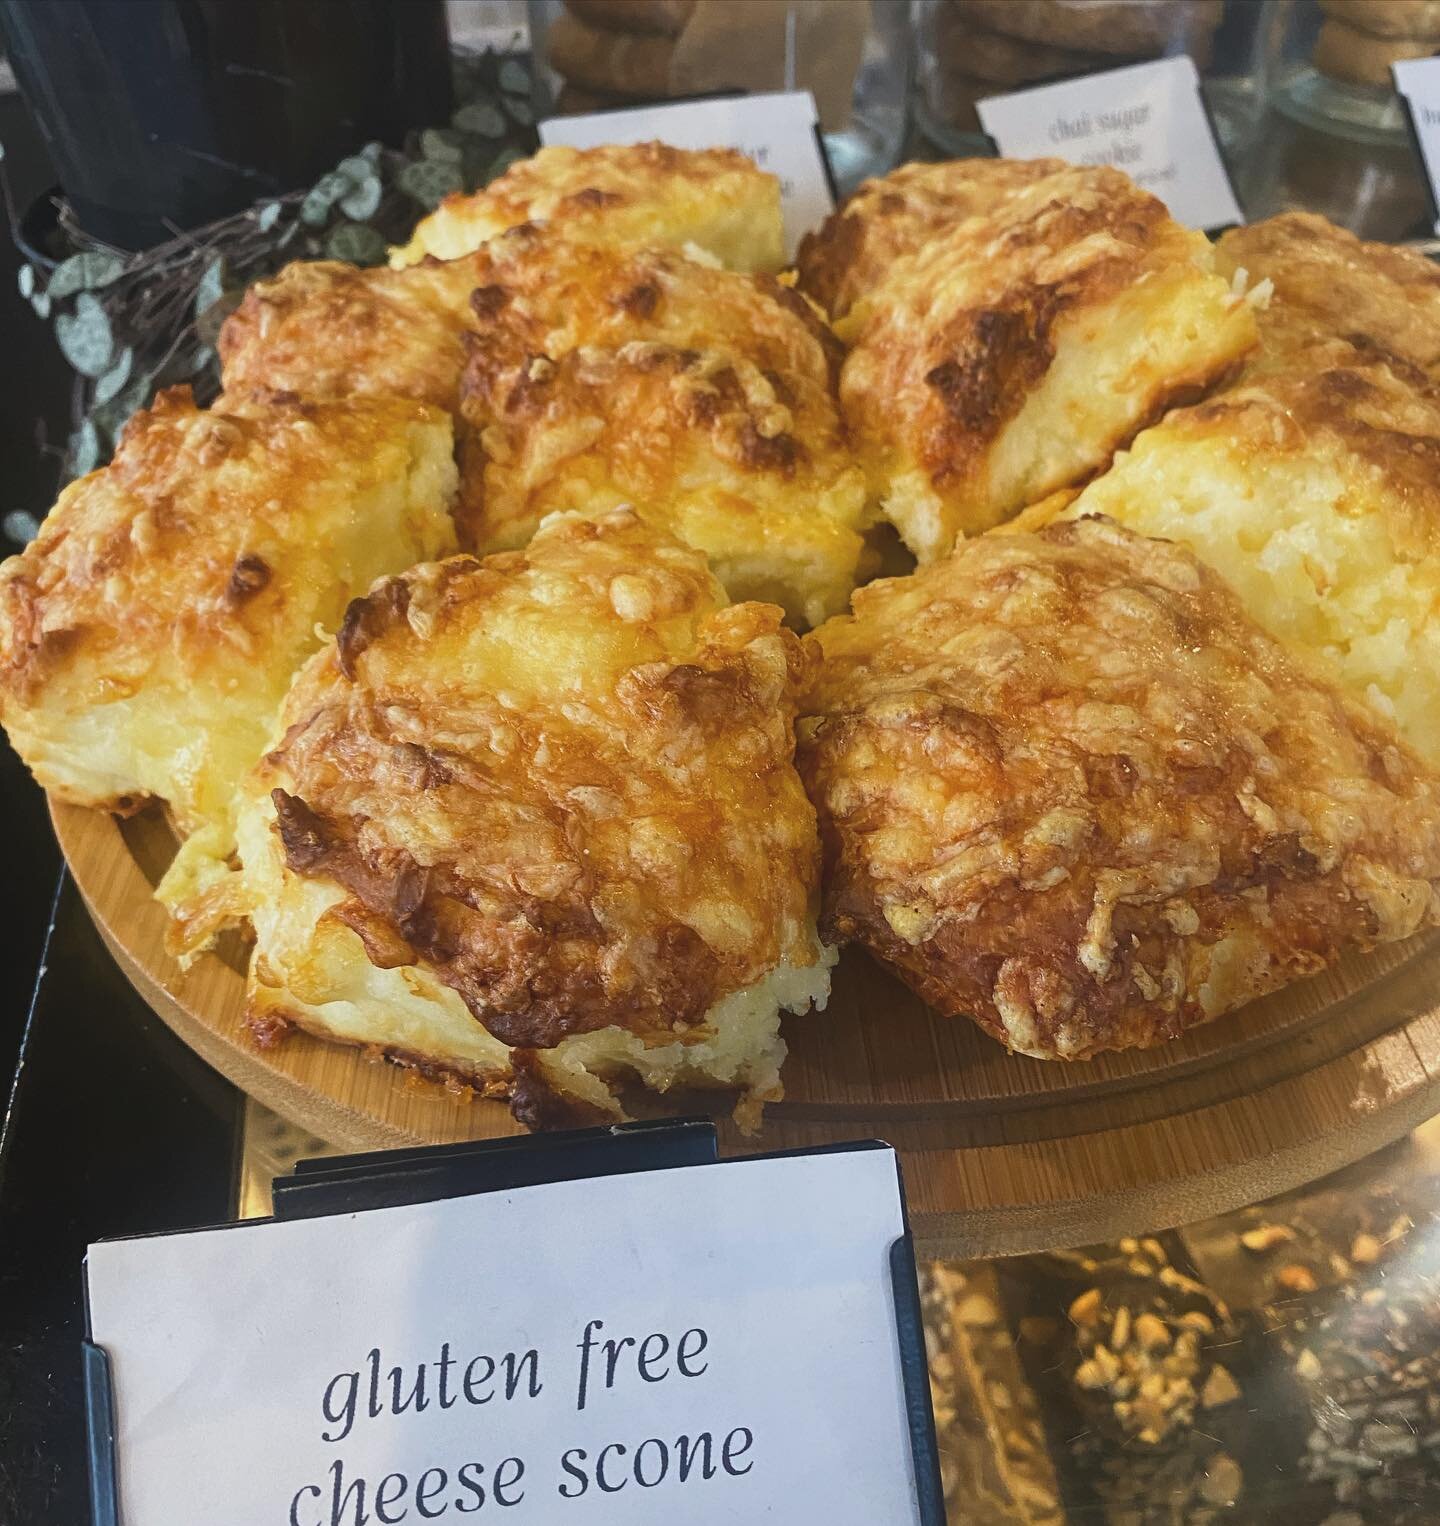 ‼️It&rsquo;s Gluten Free Cheese Scone Day! Run, don&rsquo;t walk, these won&rsquo;t be back until next Thursday! ‼️

(Regular cheese scones full of gluten still available as usual) 🧀